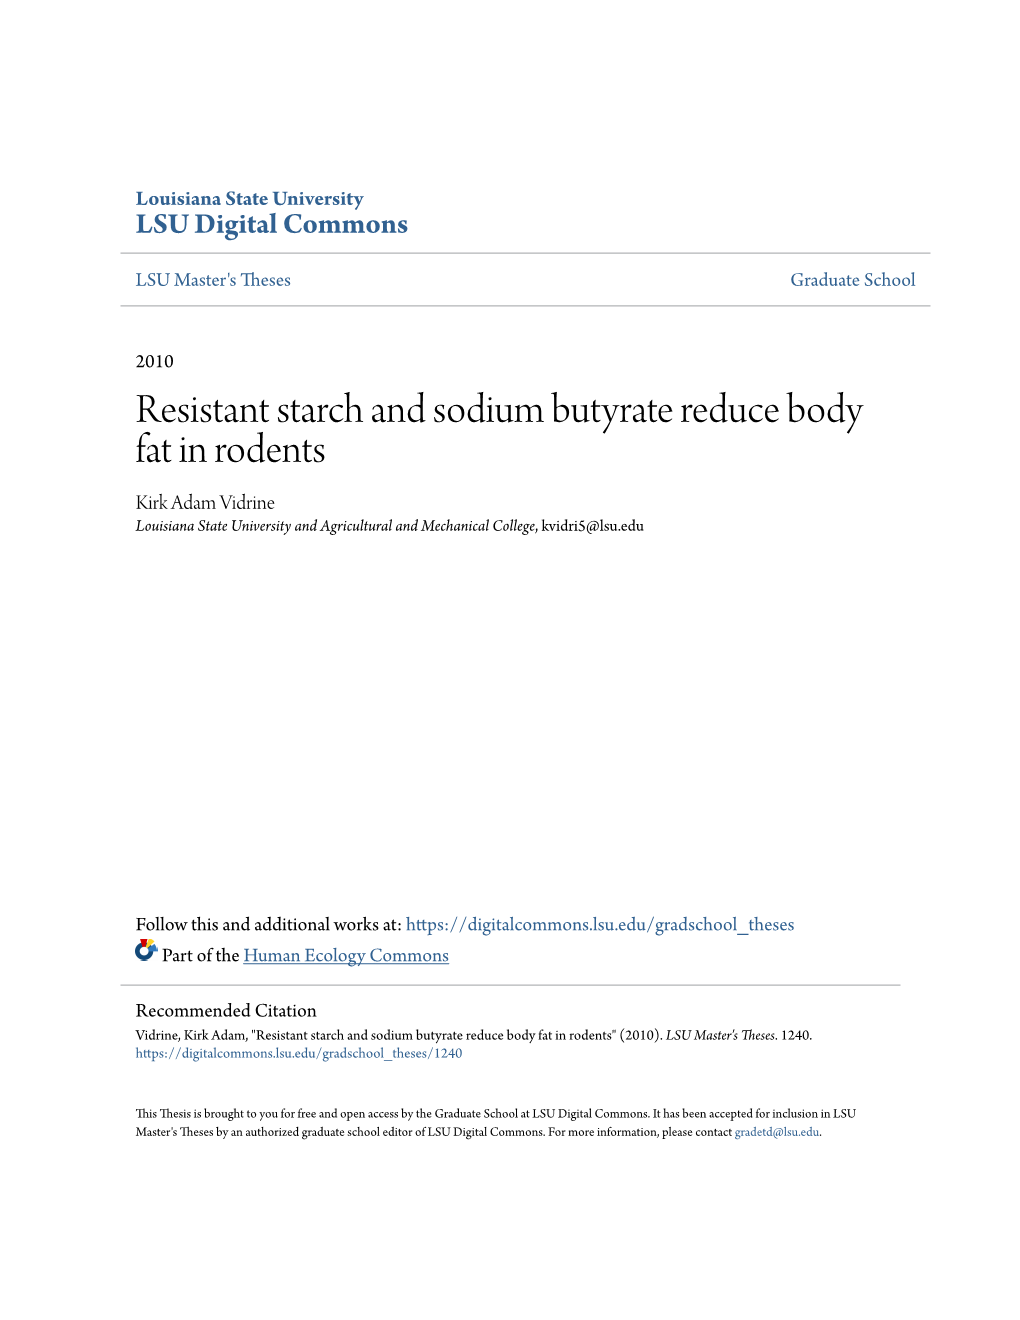 Resistant Starch and Sodium Butyrate Reduce Body Fat in Rodents Kirk Adam Vidrine Louisiana State University and Agricultural and Mechanical College, Kvidri5@Lsu.Edu